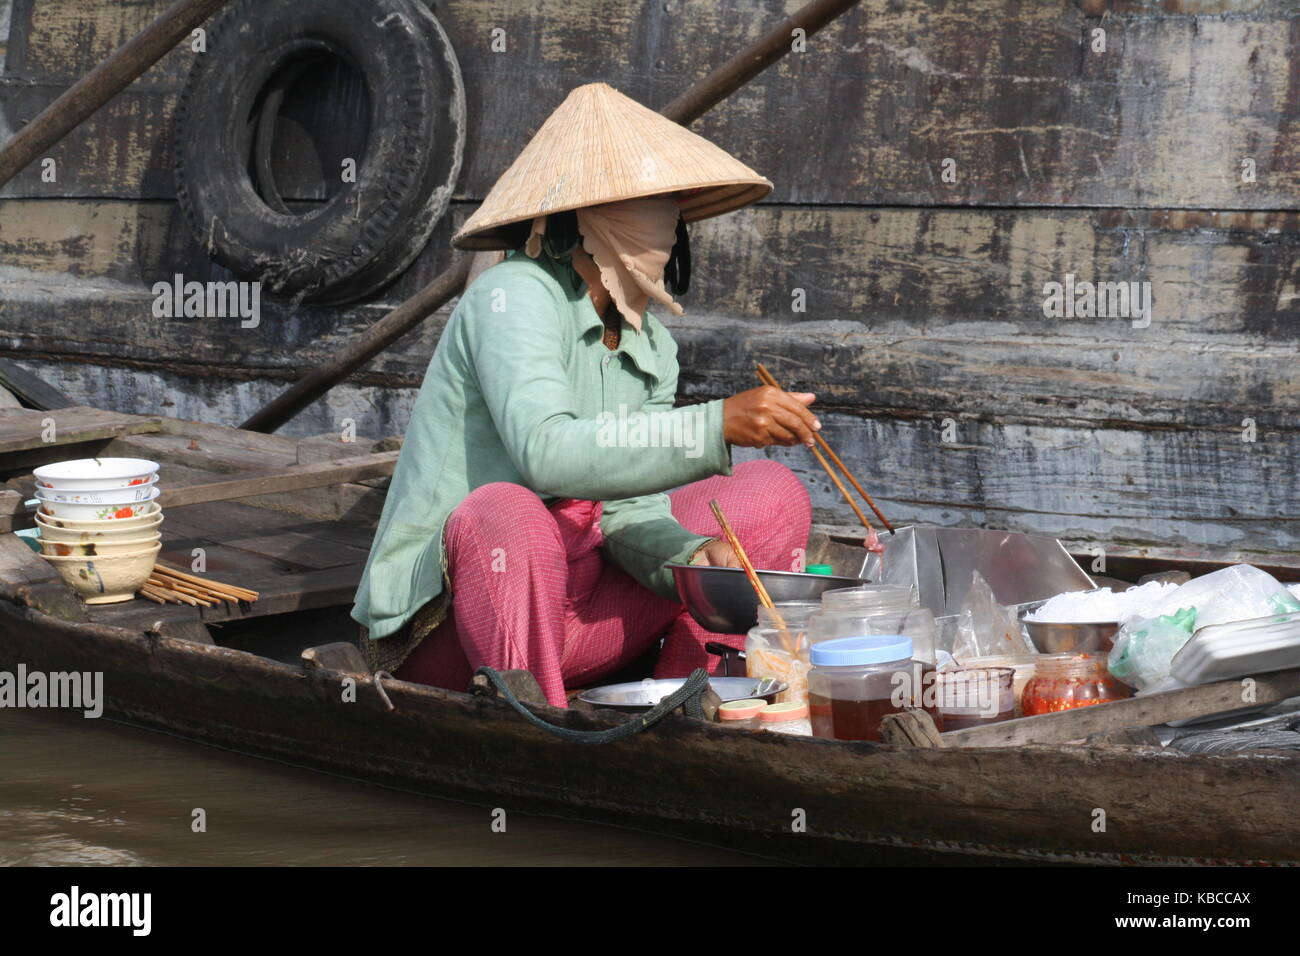 Frau in Boot mit Suppen Küche - Woman in boat with soup kitchen Stock Photo